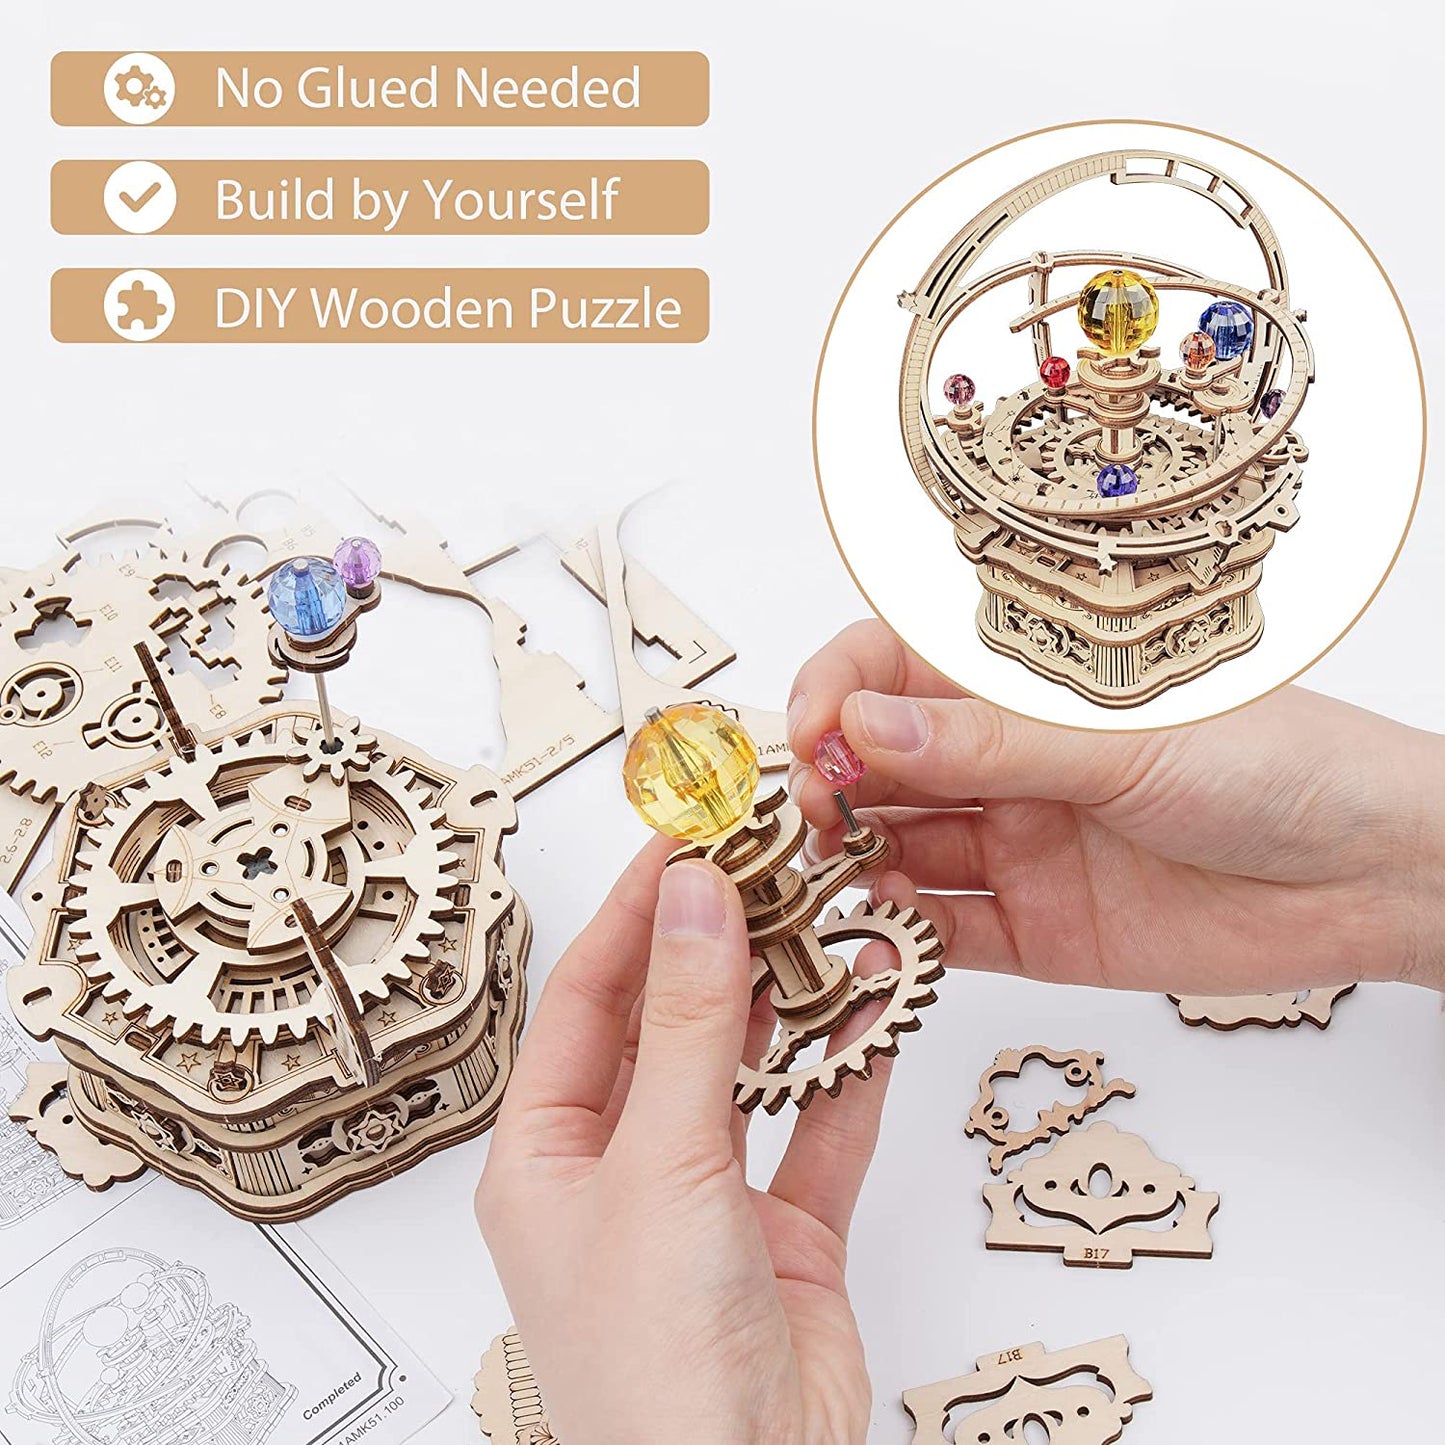 ROKR Rotating Starry Night Mechanical Music Box 3D Wooden Puzzle Assembly Model Building Kits Toys For Children Kids - AMK51